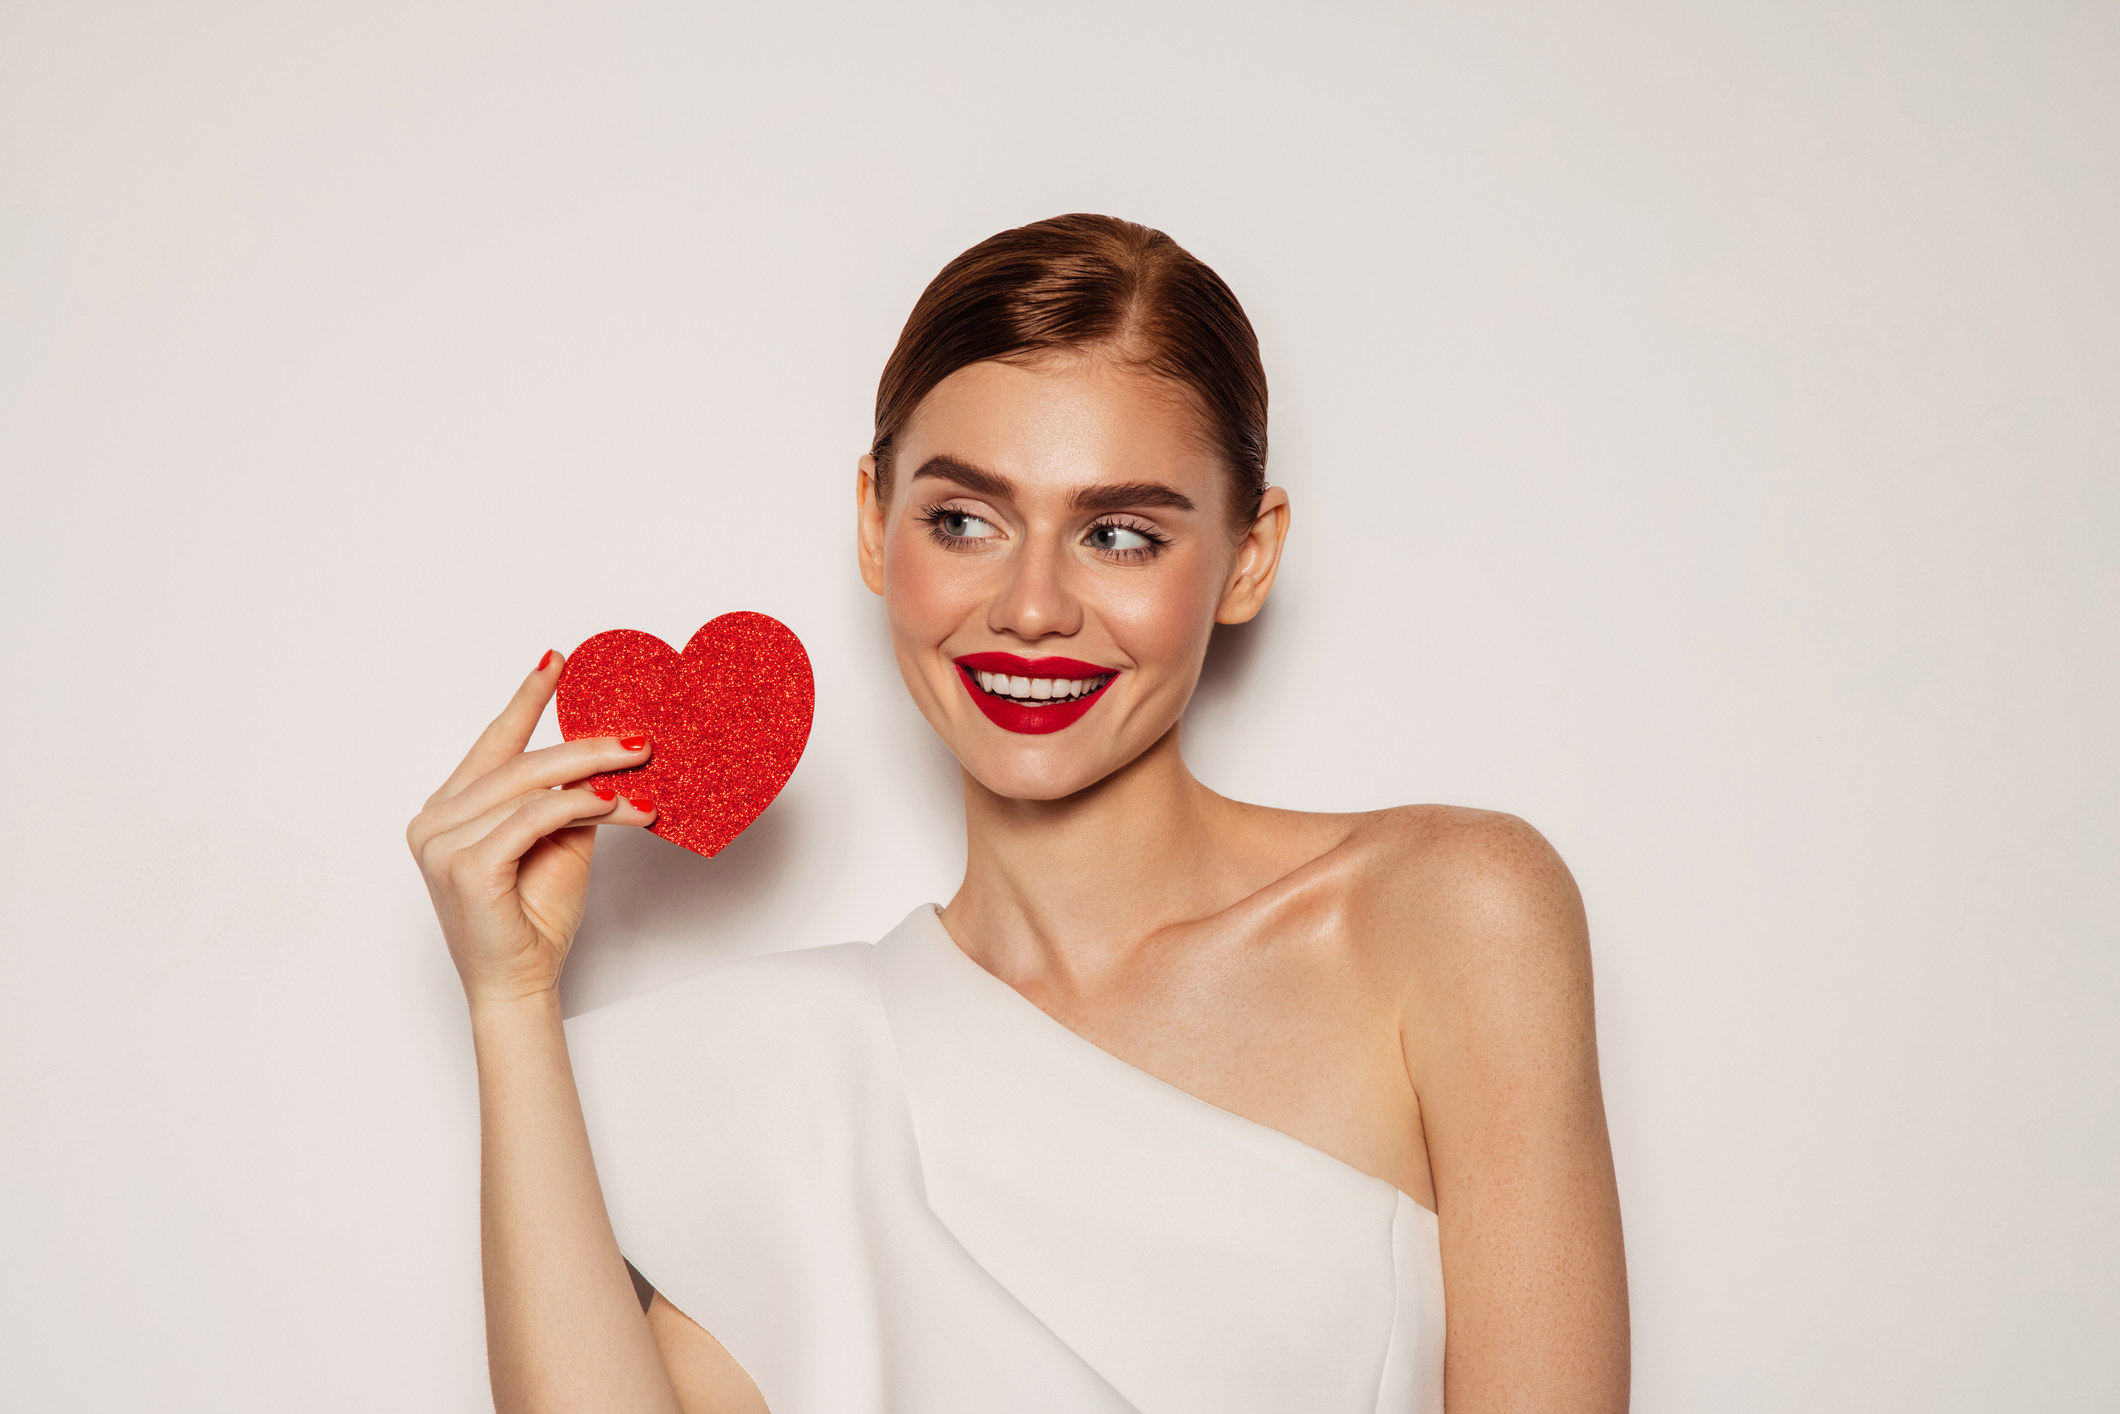 A woman smiling and holding a paper heart